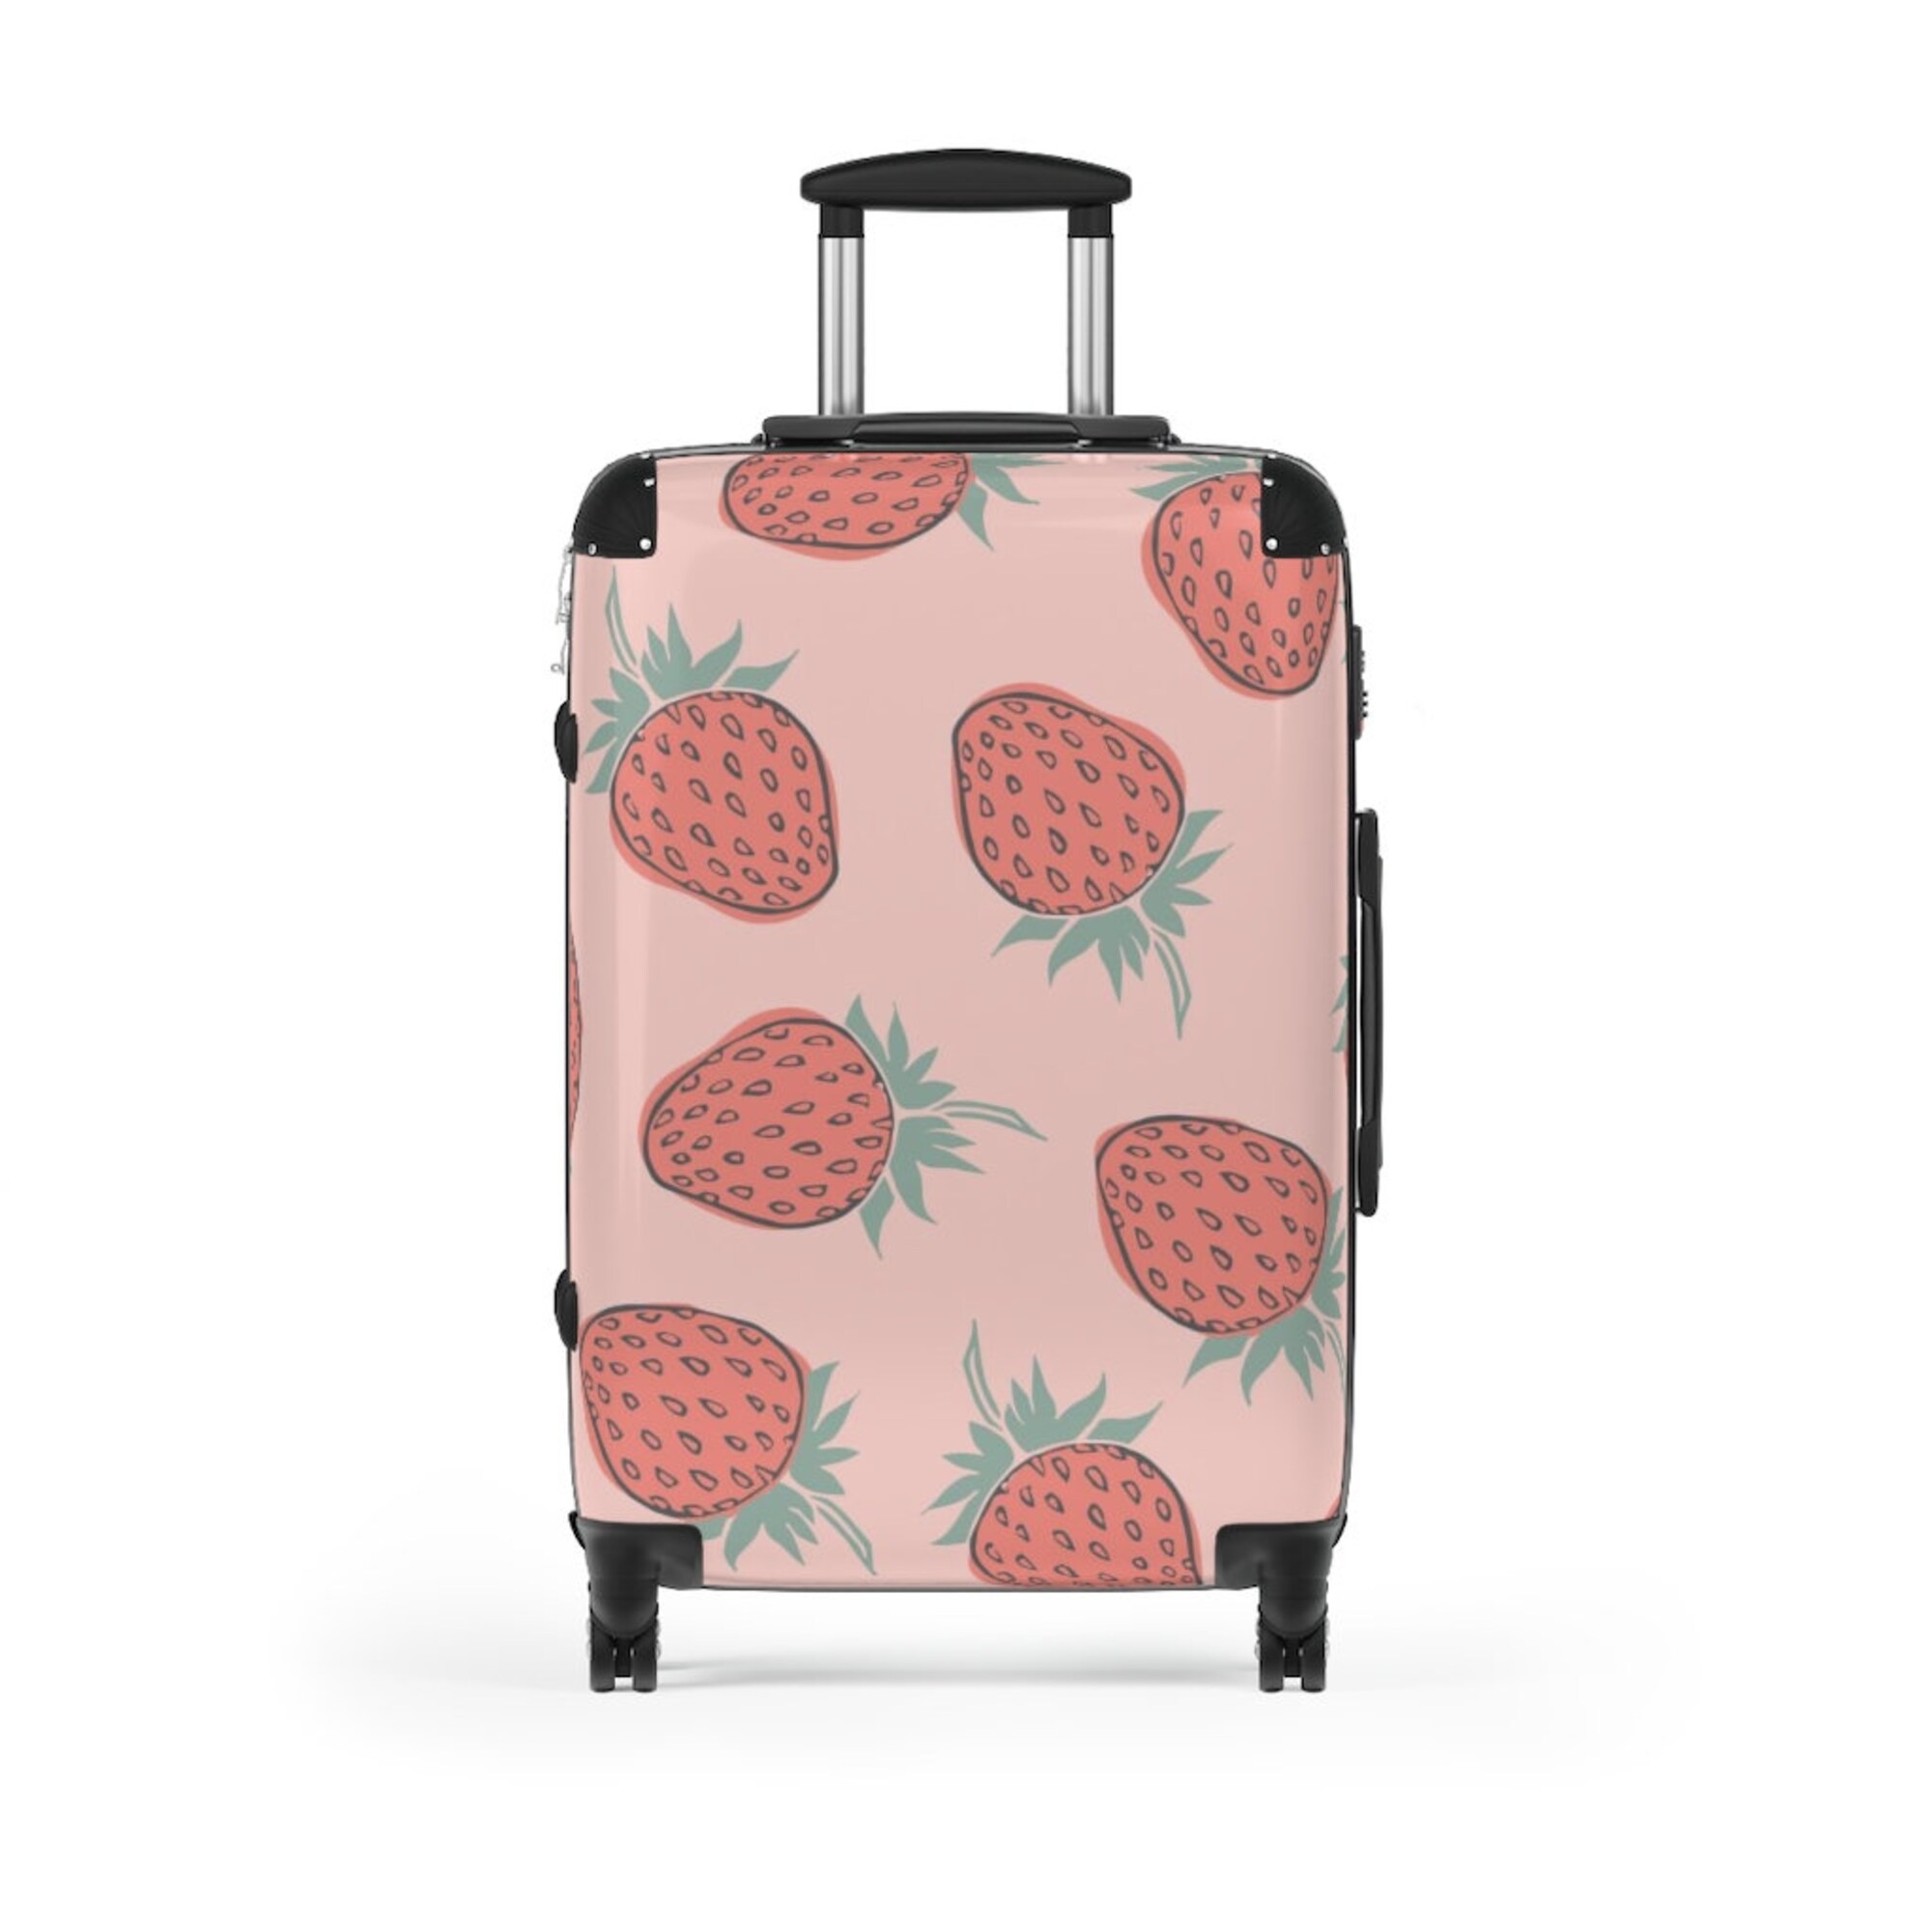 The Strawberry Suitcase